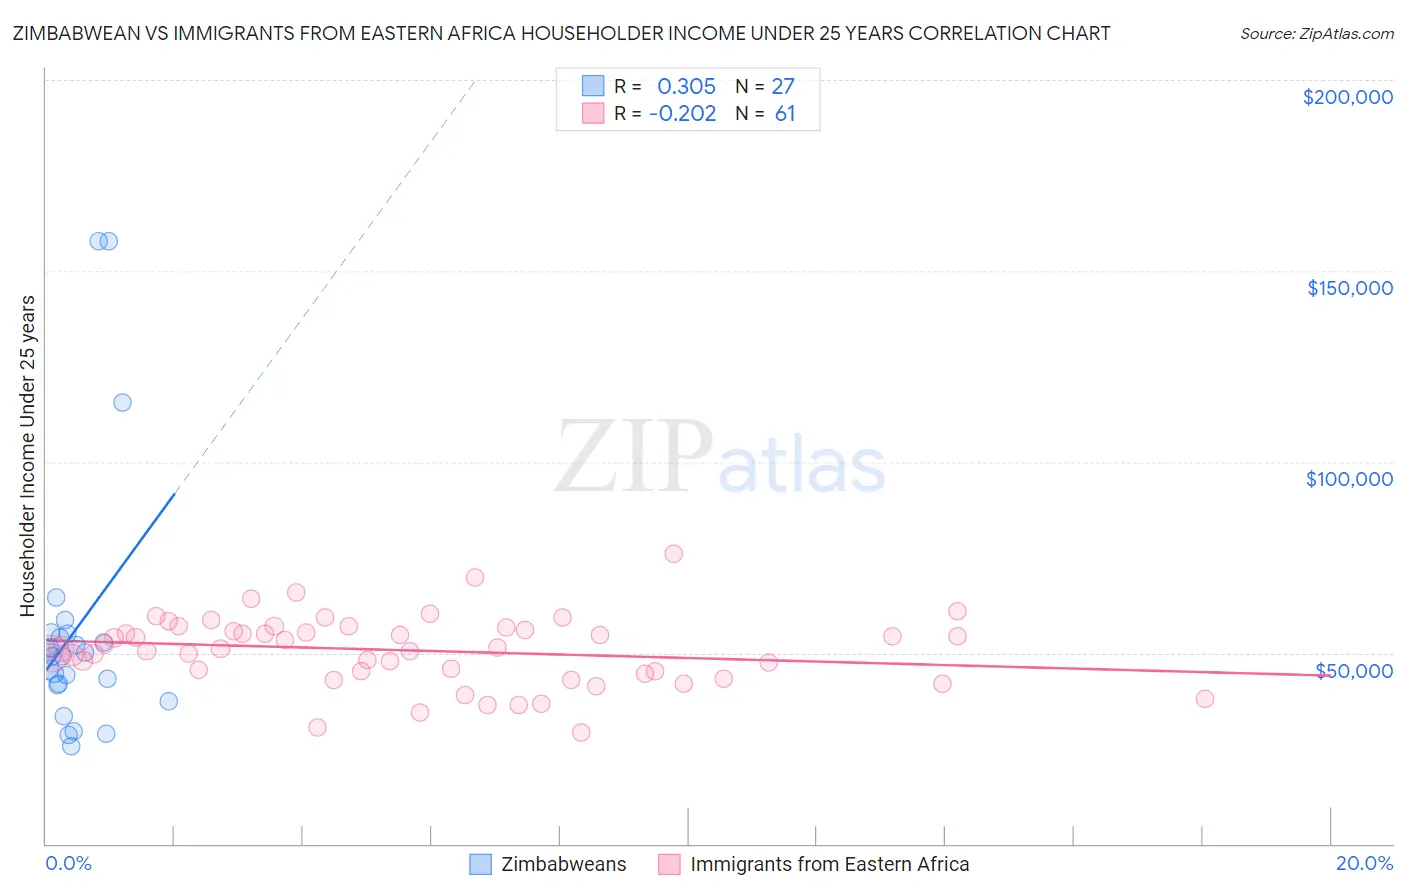 Zimbabwean vs Immigrants from Eastern Africa Householder Income Under 25 years